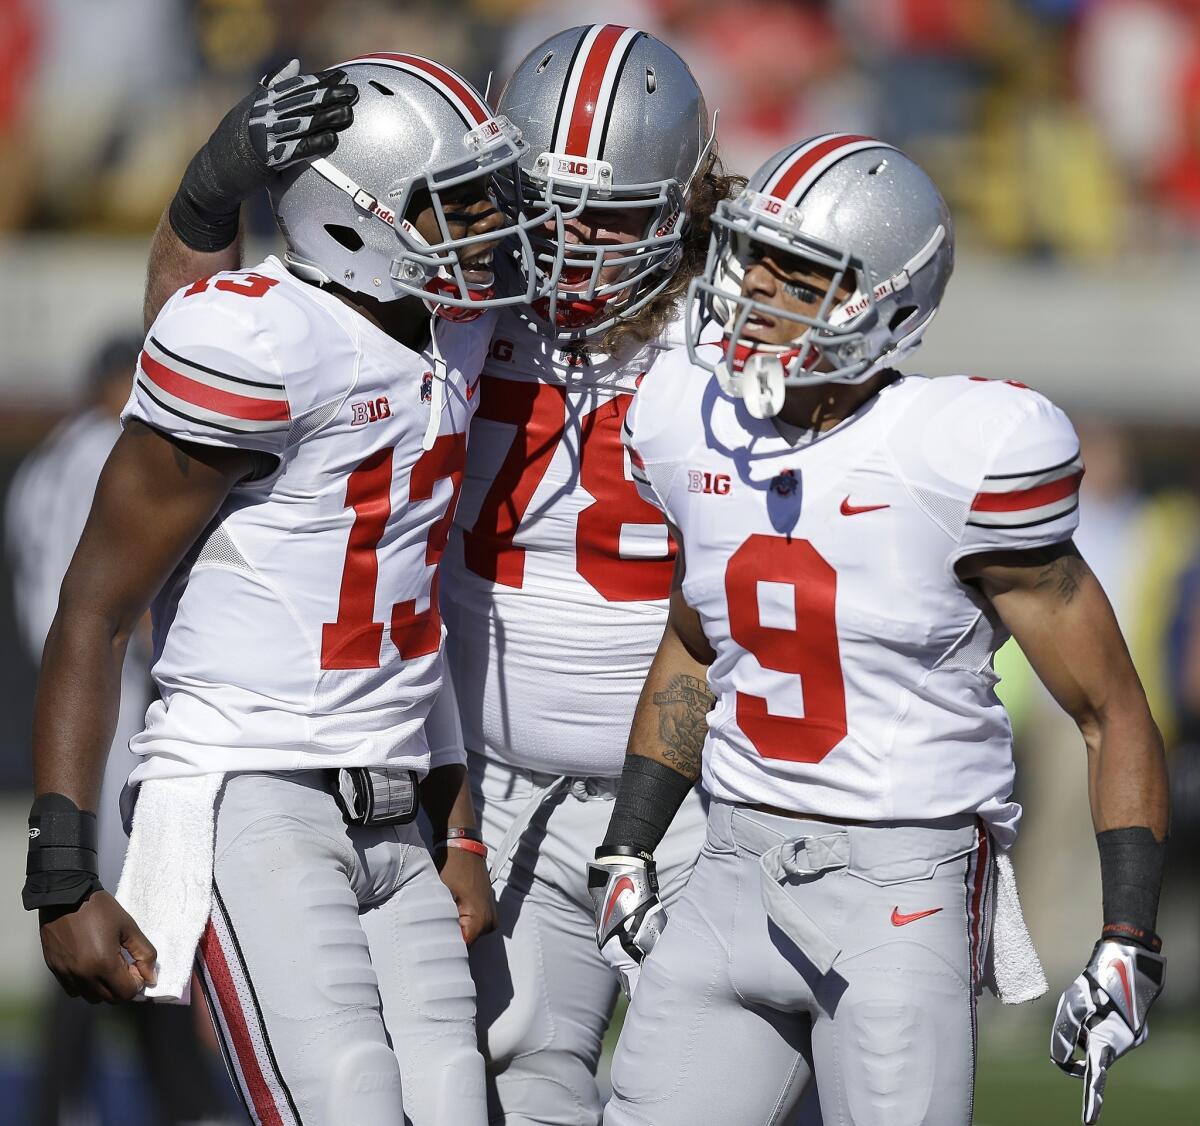 Ohio State's Kenny Guiton, left, Andrew Norwell, center, and Devin Smith celebrate a touchdown against California on Saturday. Expect to see plenty of scoring celebrations by the Buckeyes this week.